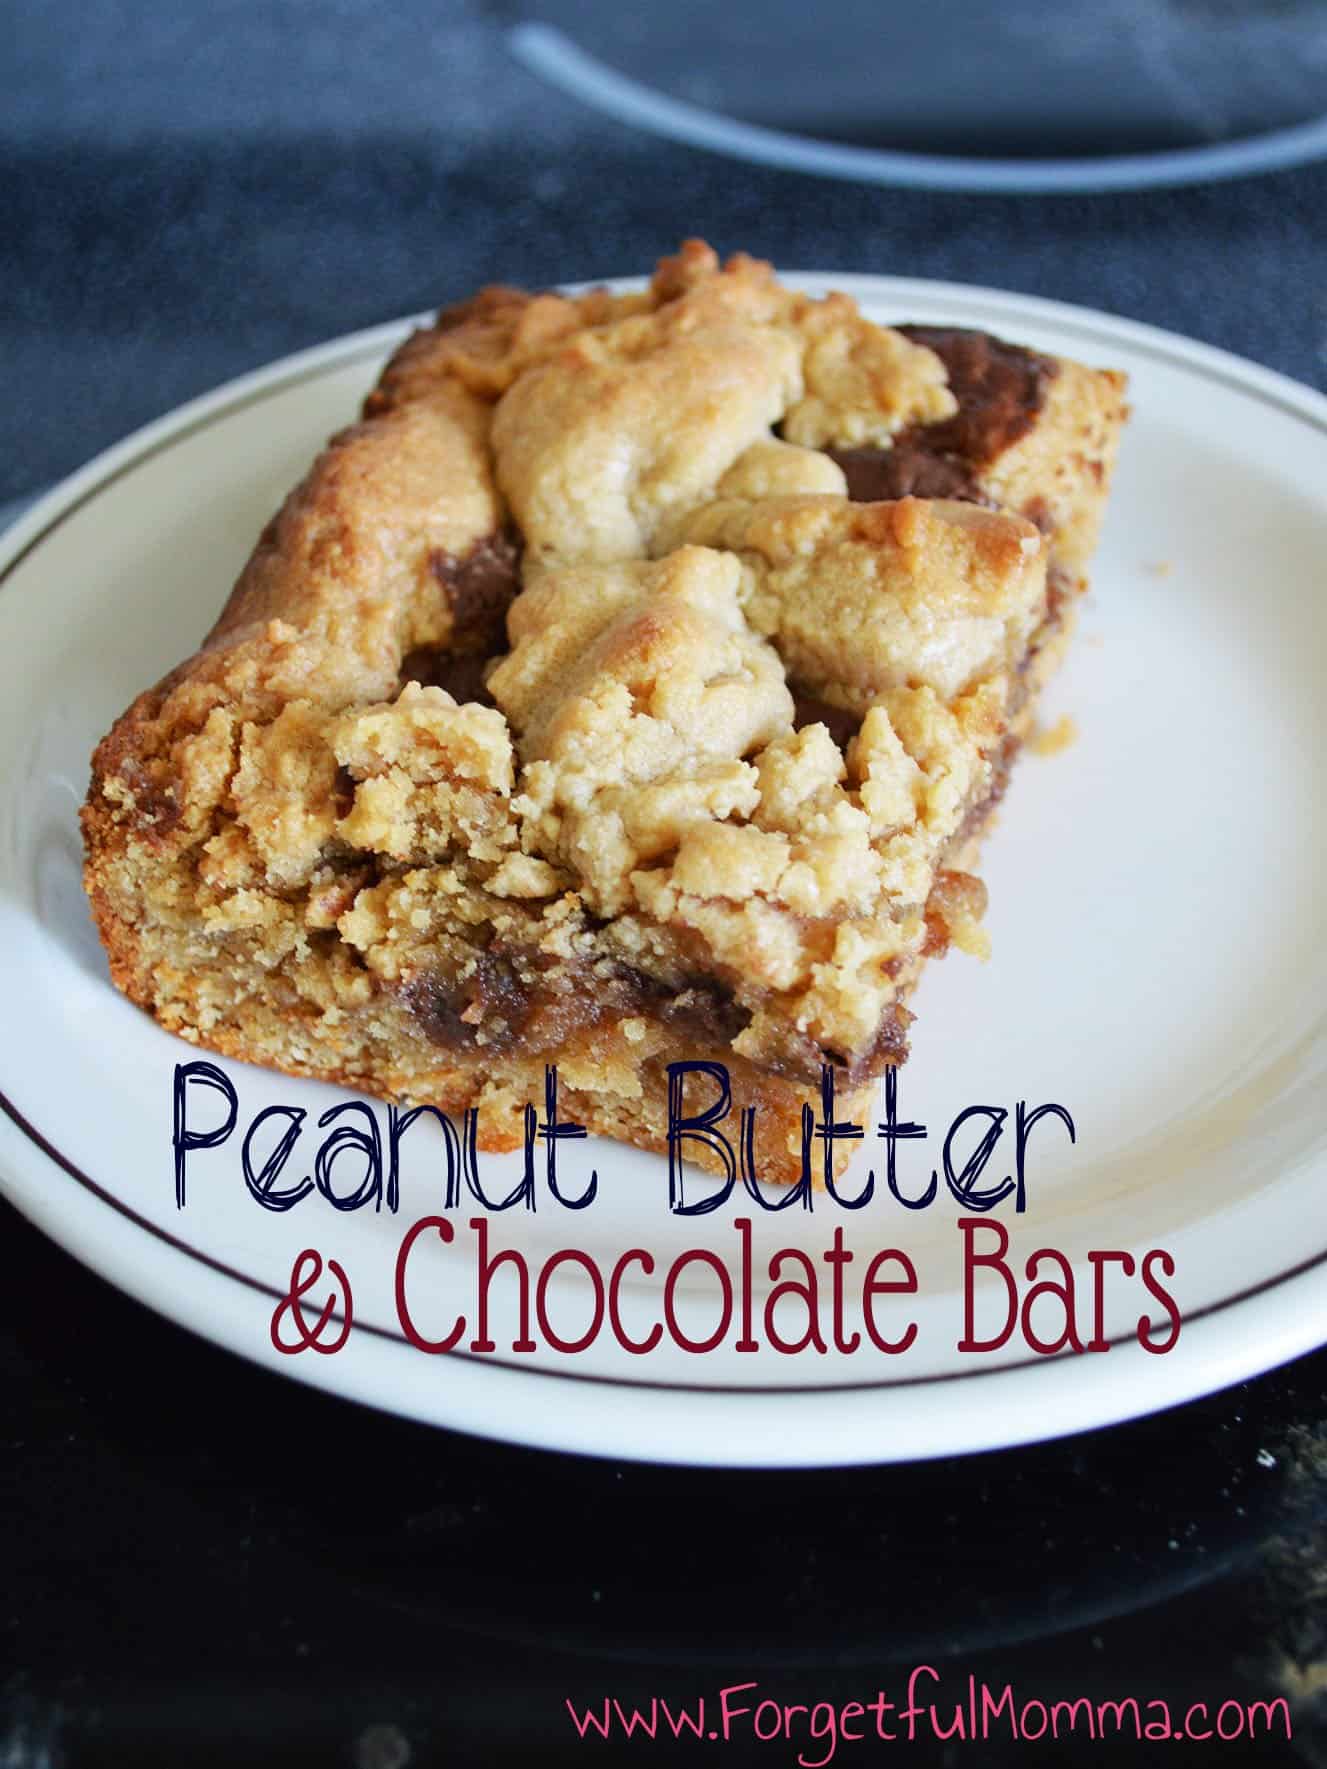 Peanut Butter and Chocolate Bars